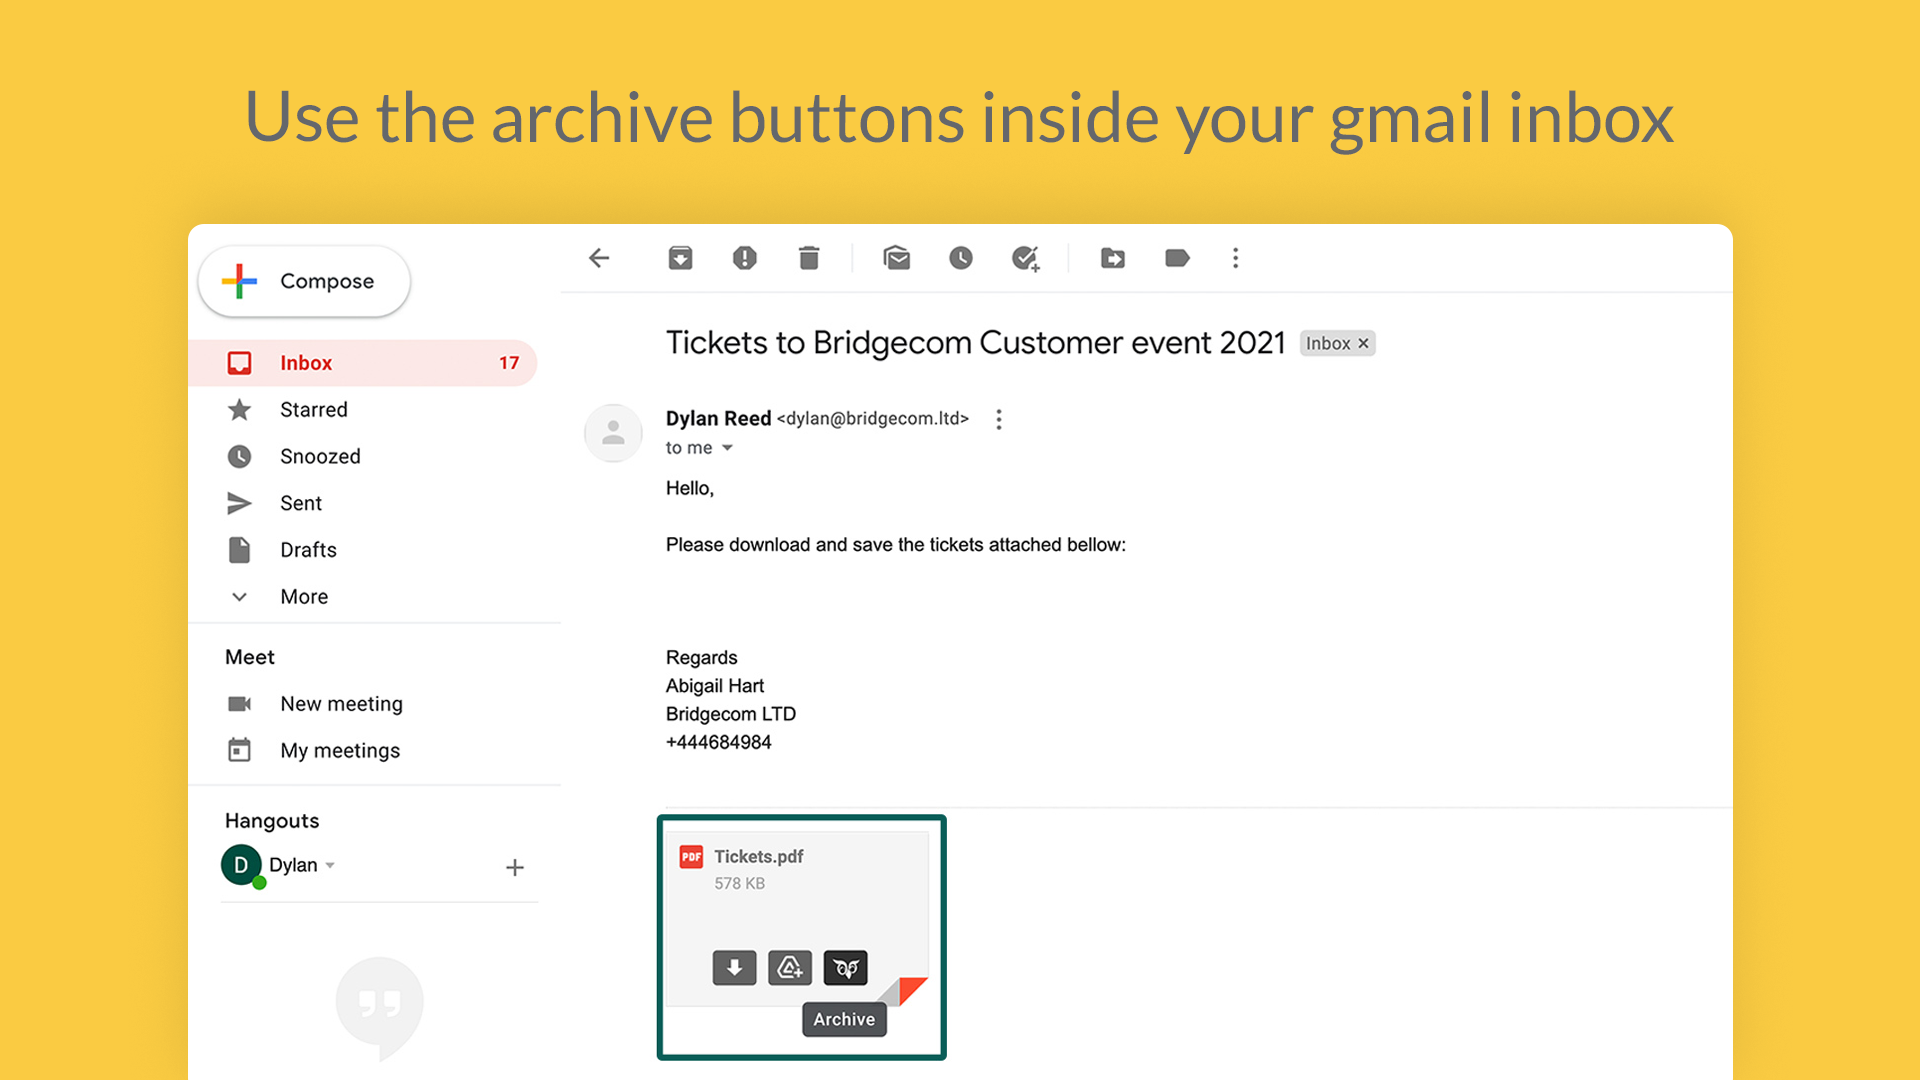 6 Use the archive buttons inside your gmail inbox.png